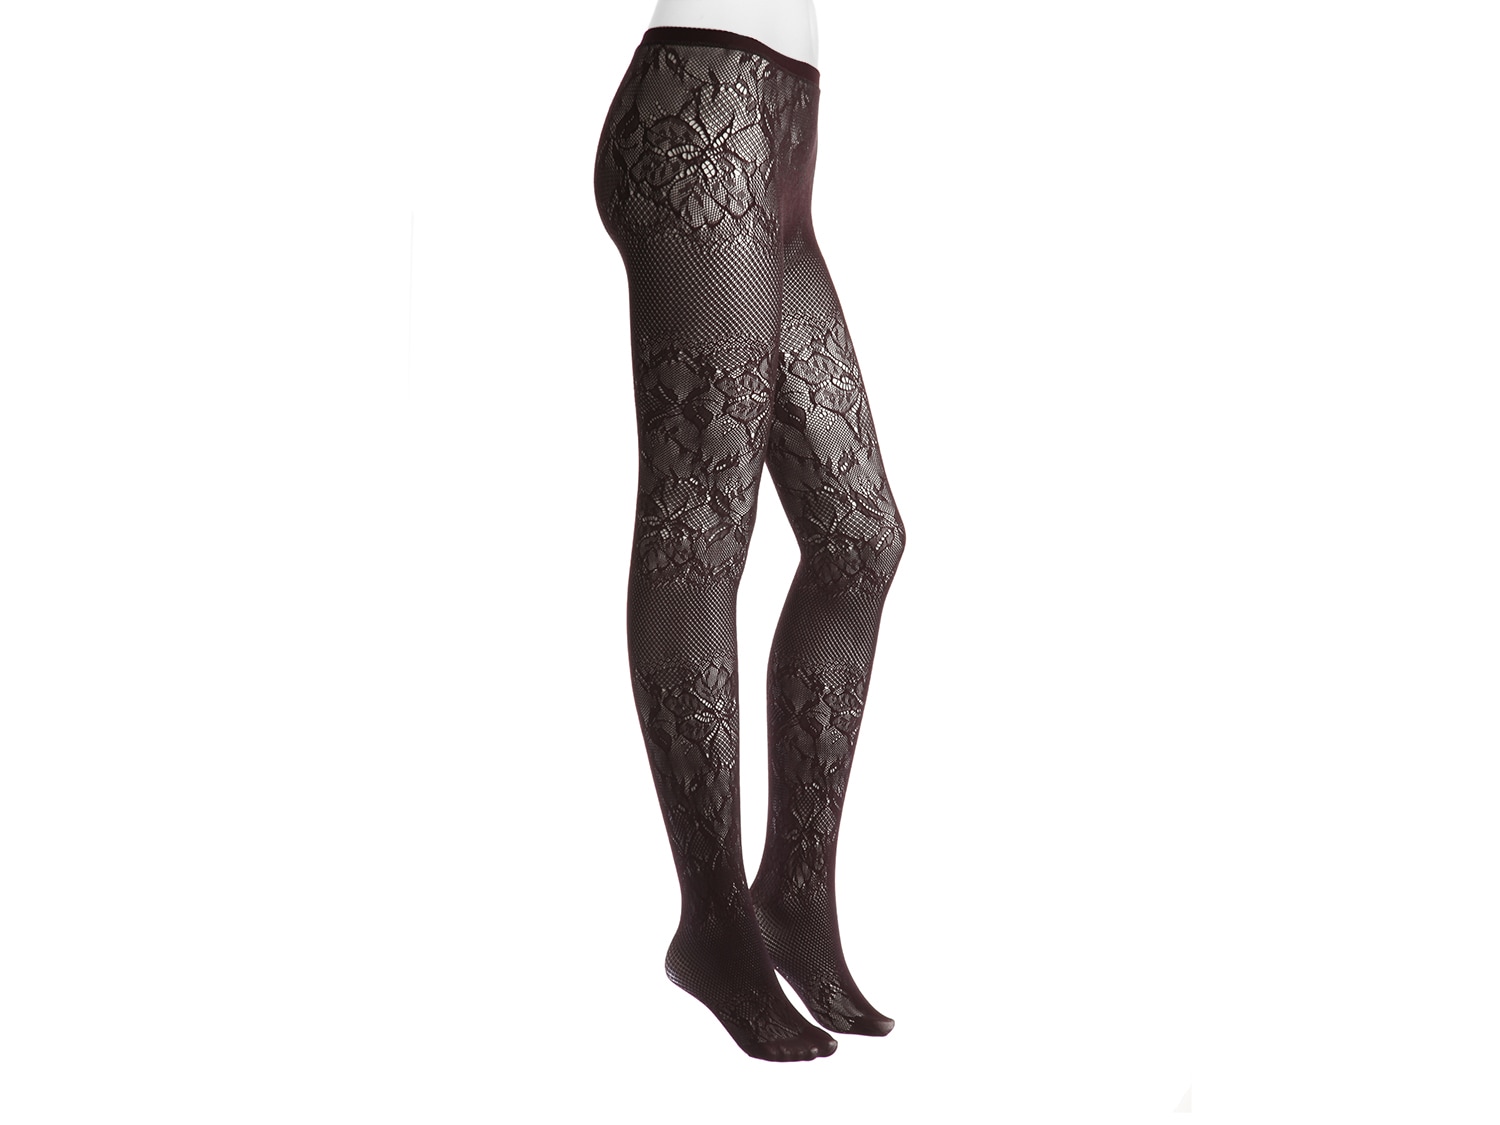 INC International Concepts Women's Flocked Floral Tights XS/S, S/M